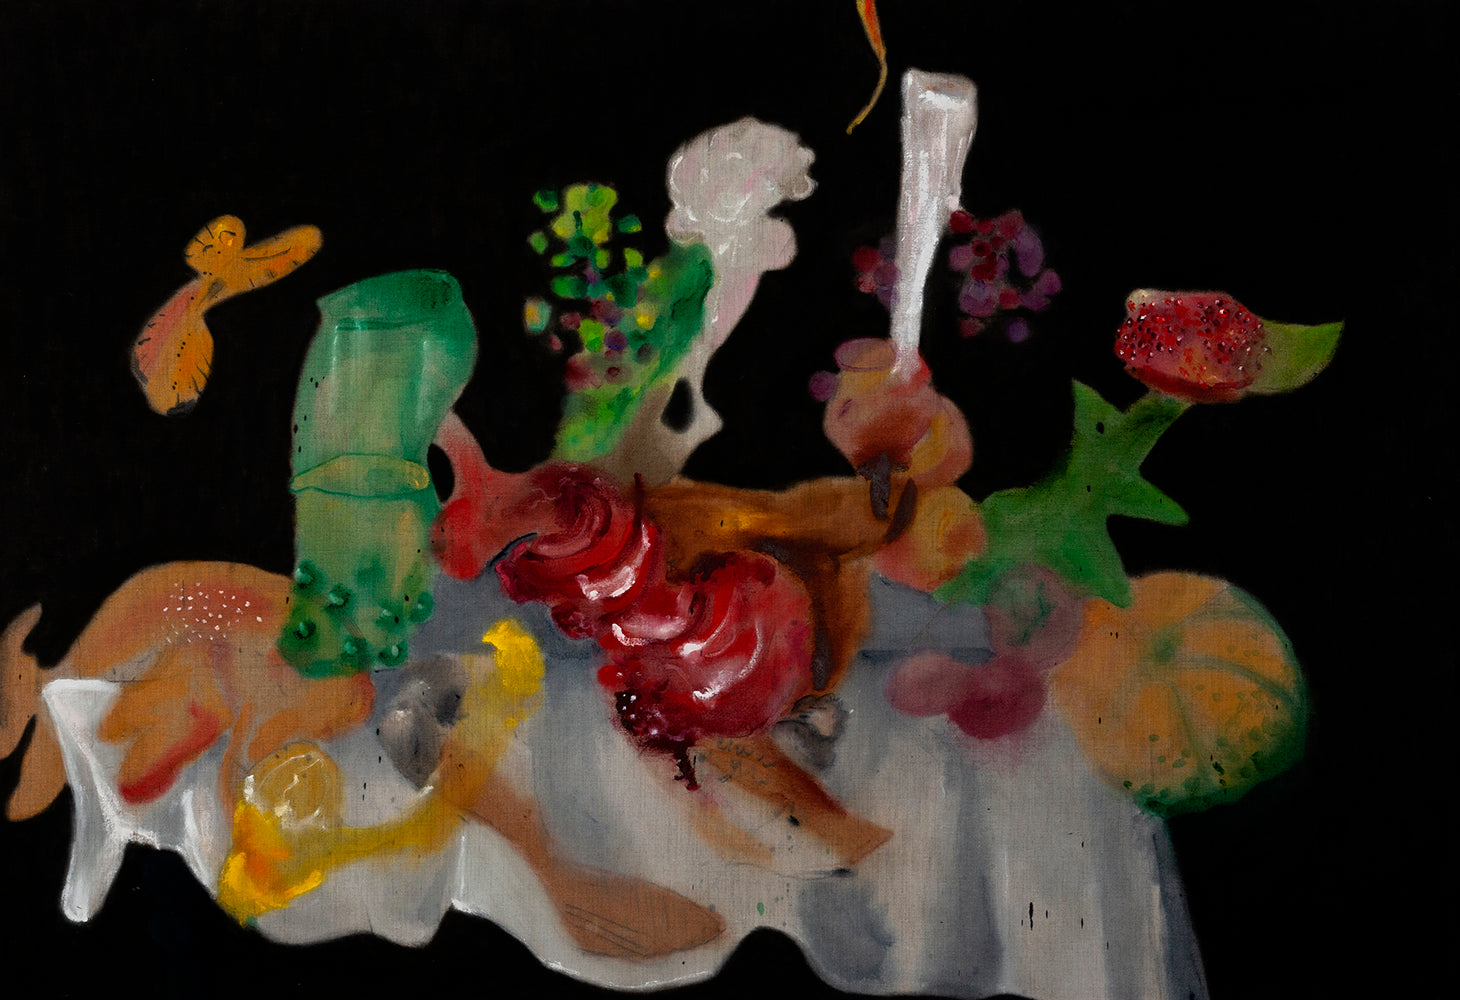 Josh Robbins - Lobster, glass of wine, butterfly, boar's leg, flower, candle, grapes, pomegranate, leaves, pumpkin, squash, berries, fish, oysters, peeled lemon and table cloth - With Luxe Arm